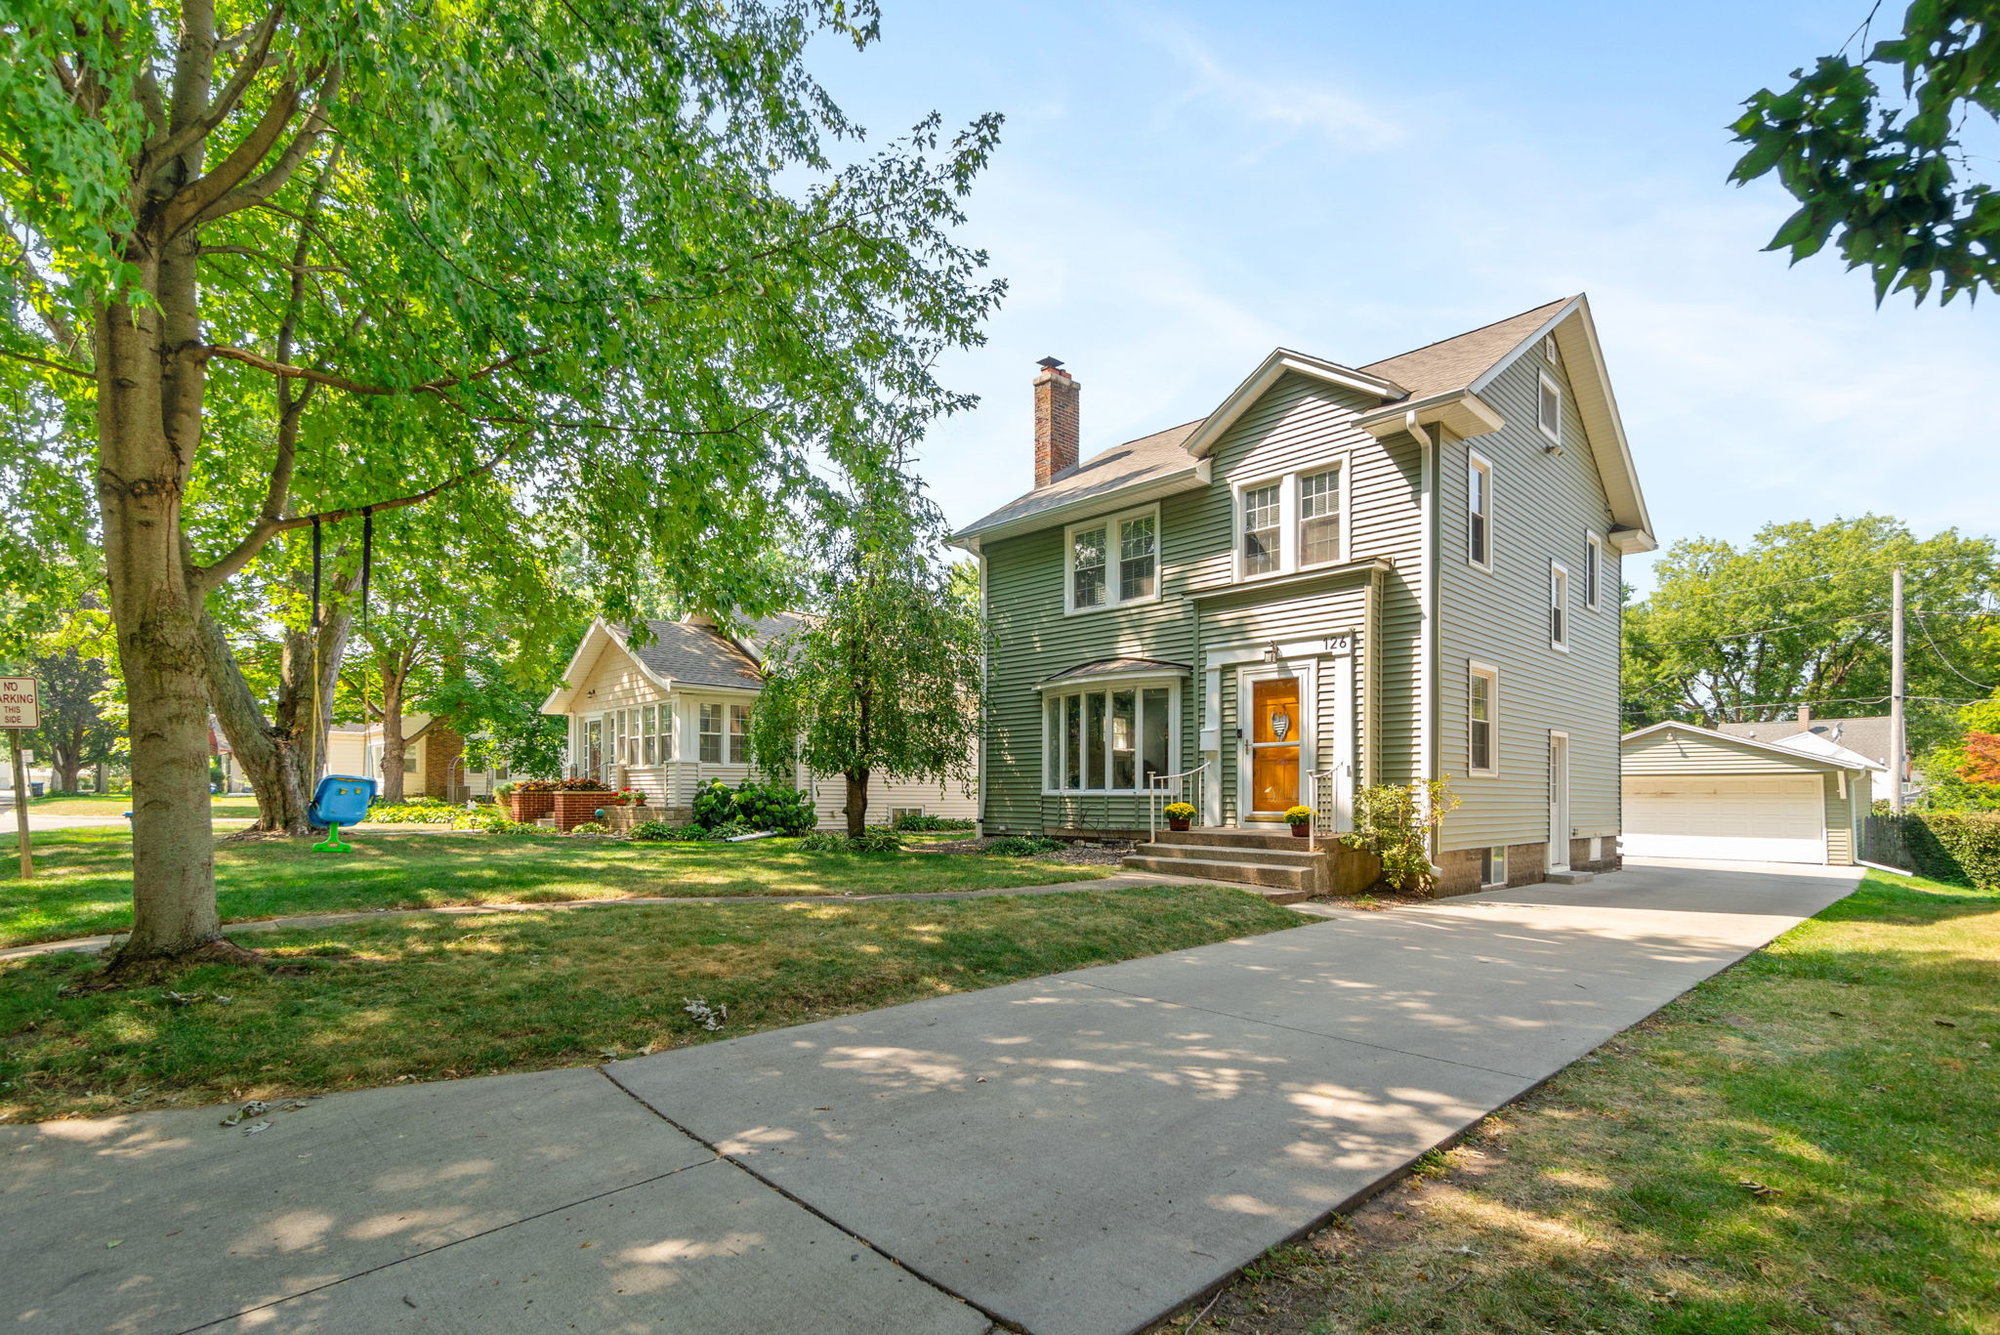 The Charming & Character-Filled Home in the Prospect area of Waterloo Iowa | Oakridge Real Estate